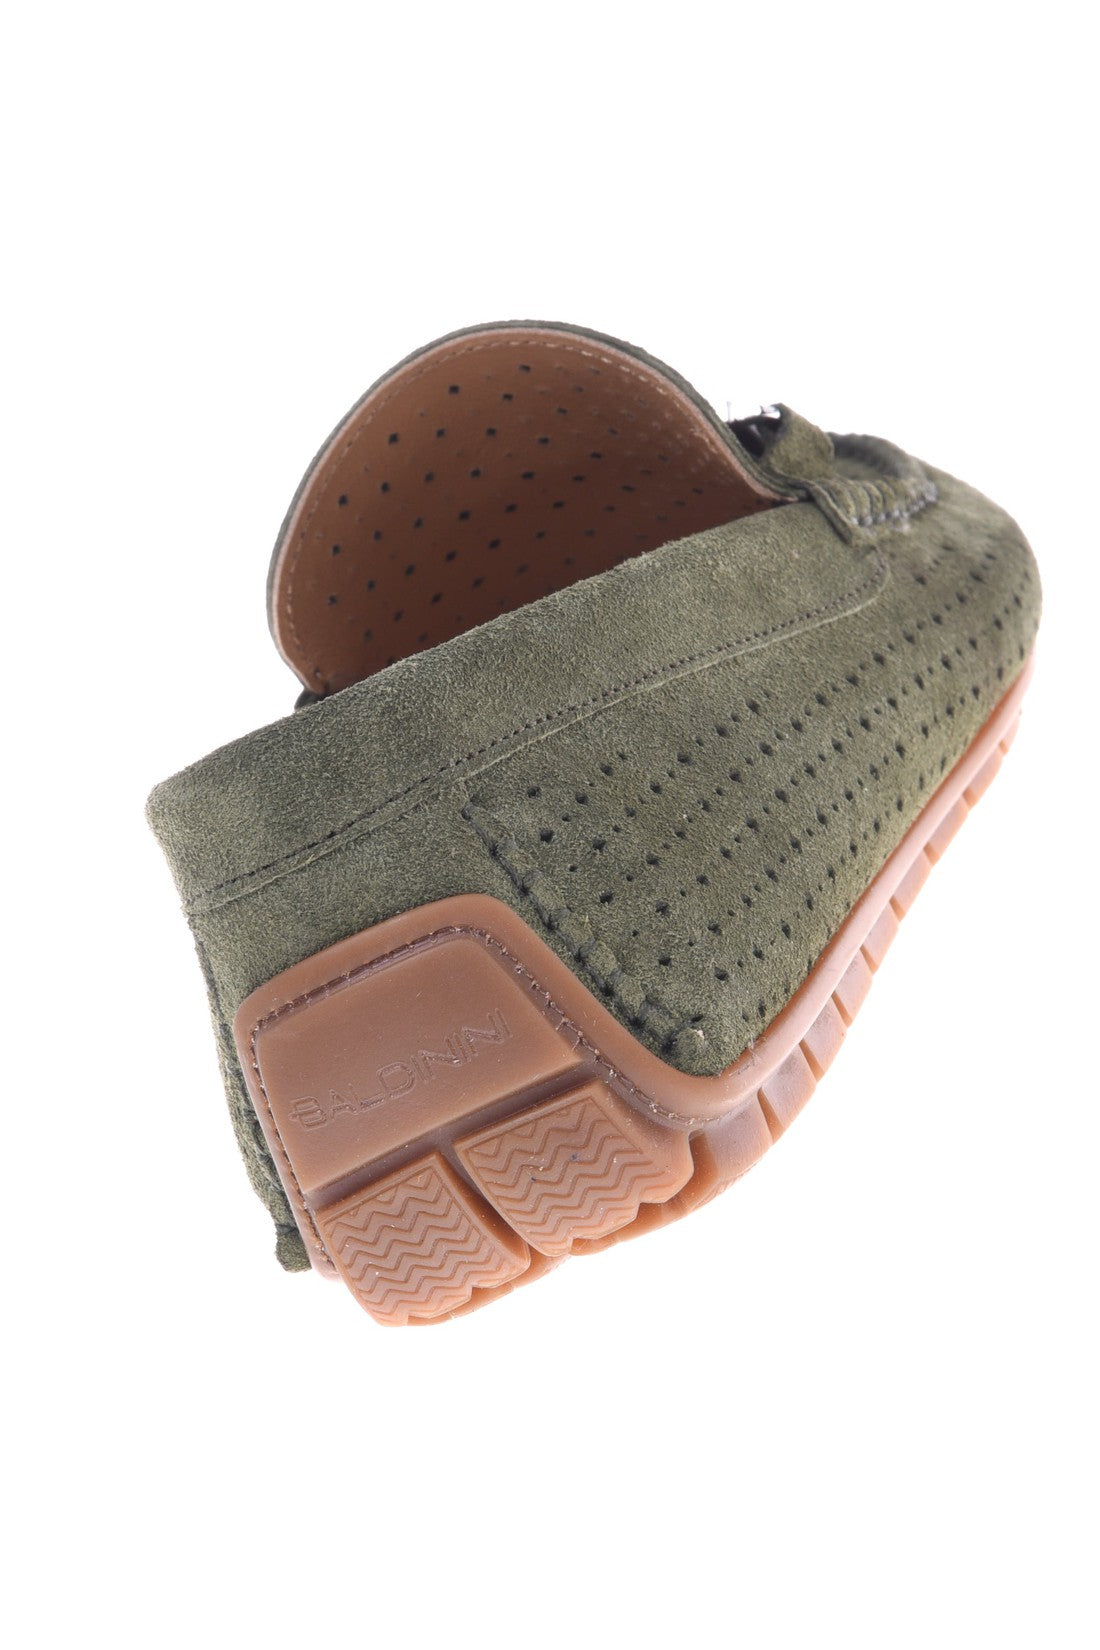 Loafer in green perforated suede